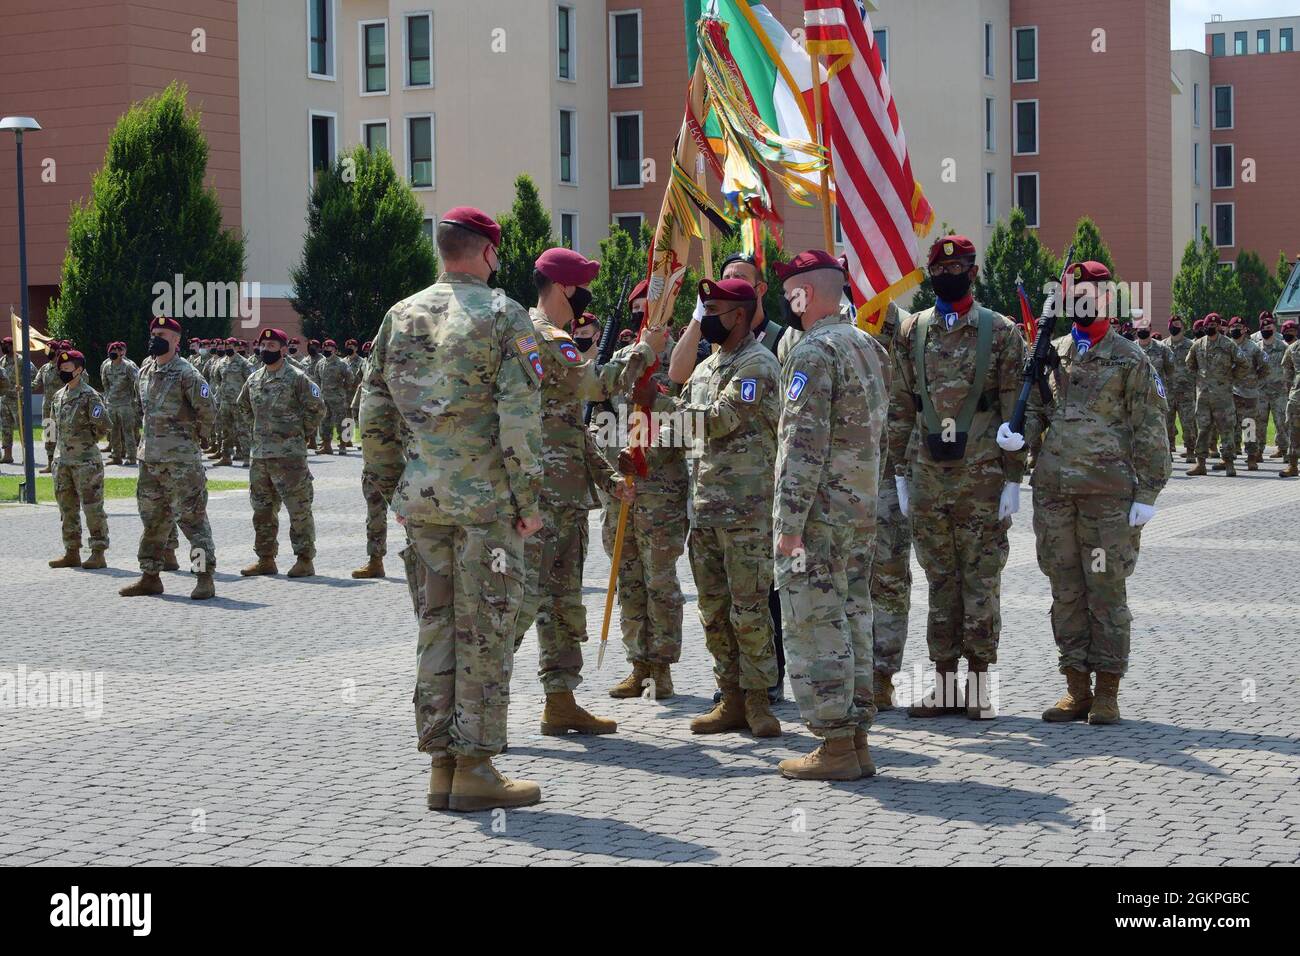 U.S. Army Lt. Col. Anthony P. Newman, incoming commander of 173rd Brigade Support Battalion, 173rd Airborne Brigade, passes the colors to Command Sgt. Asgar Kamaludeen during change of command ceremony under Covid-19 prevention condition at Caserma Del Din, Vicenza, Italy June 14, 2021. The 173rd Airborne Brigade is the U.S. Army Contingency Response Force in Europe, capable of projecting ready forces anywhere in the U.S. European, Africa or Central Commands' areas of responsibility. Stock Photo